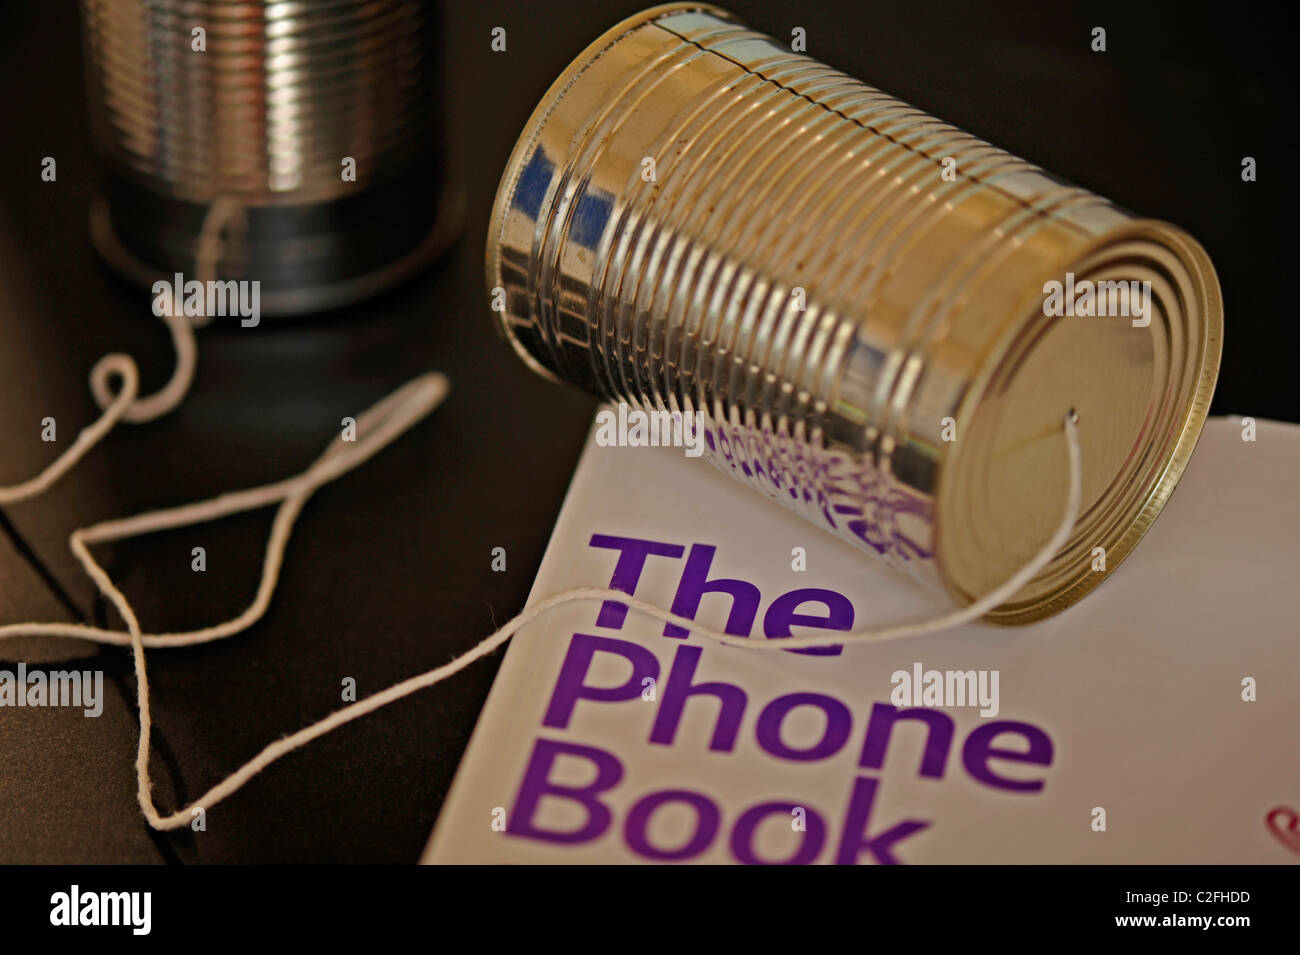 Concept image of a telephone made from two tin cans and a piece of string Stock Photo